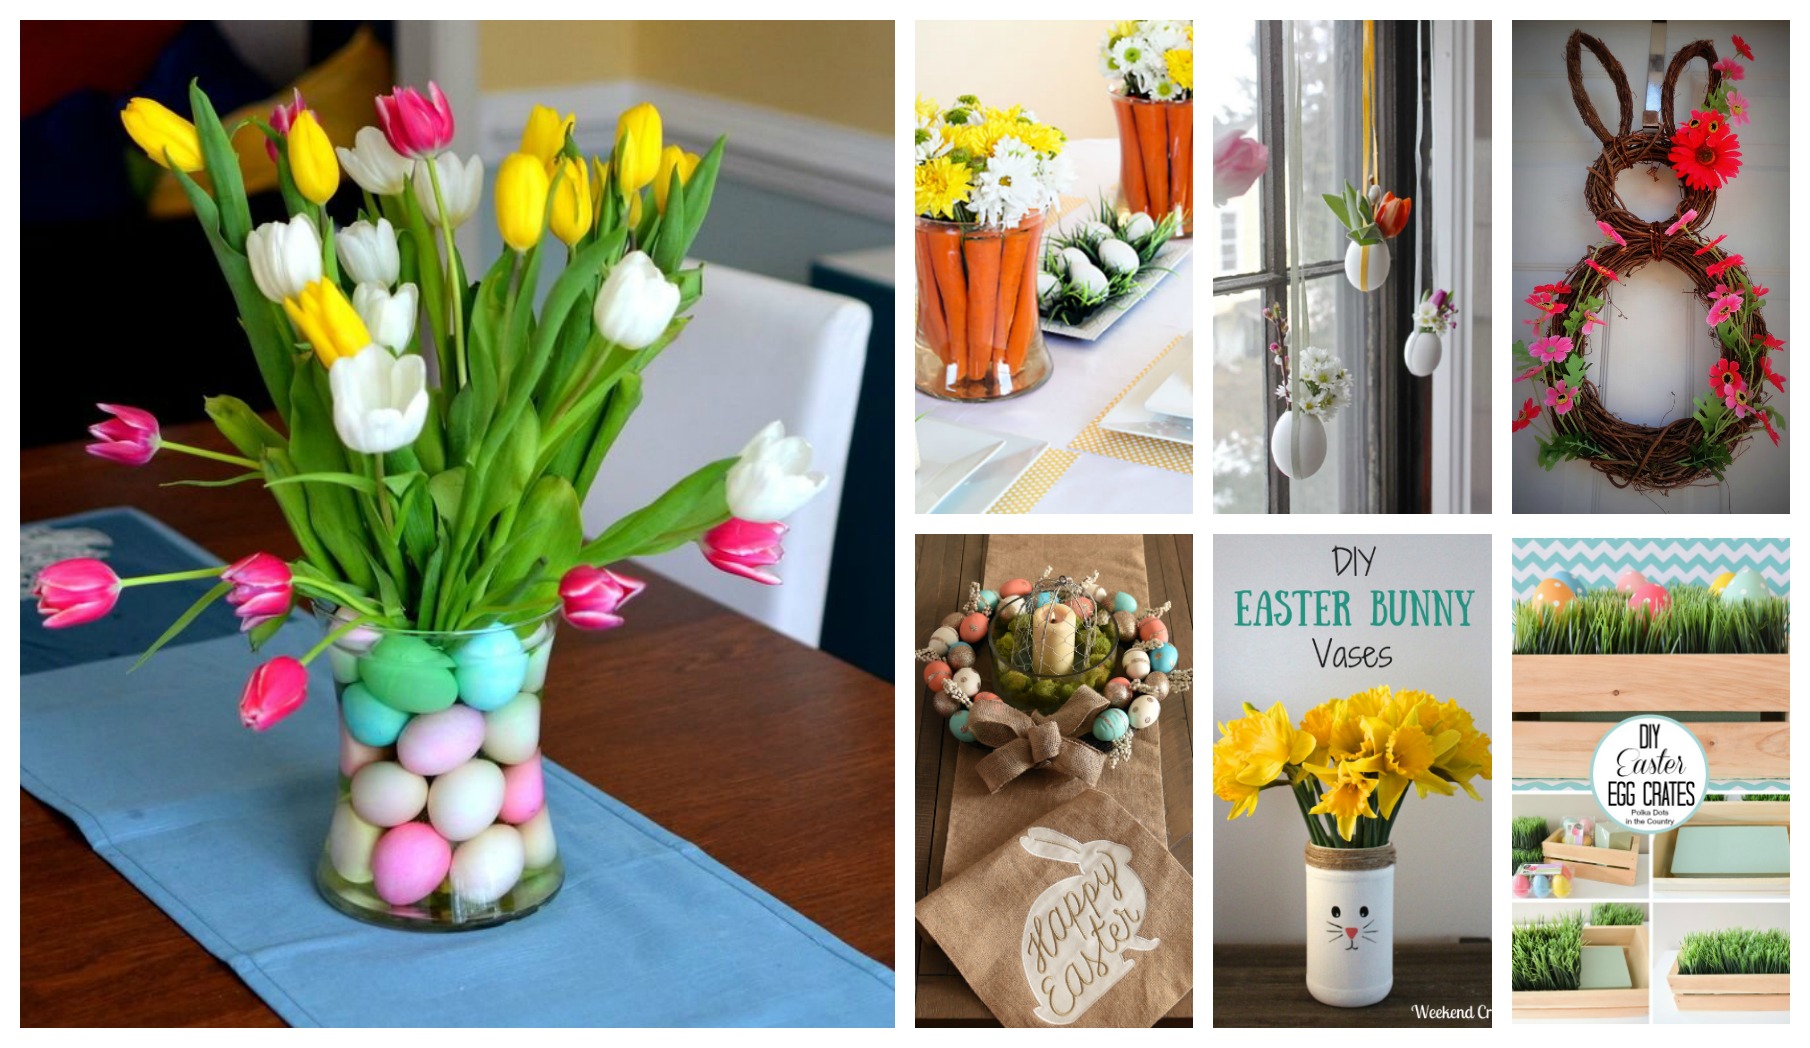 Adorable Easter Home Decorations That Will Make Your Home Festive ...